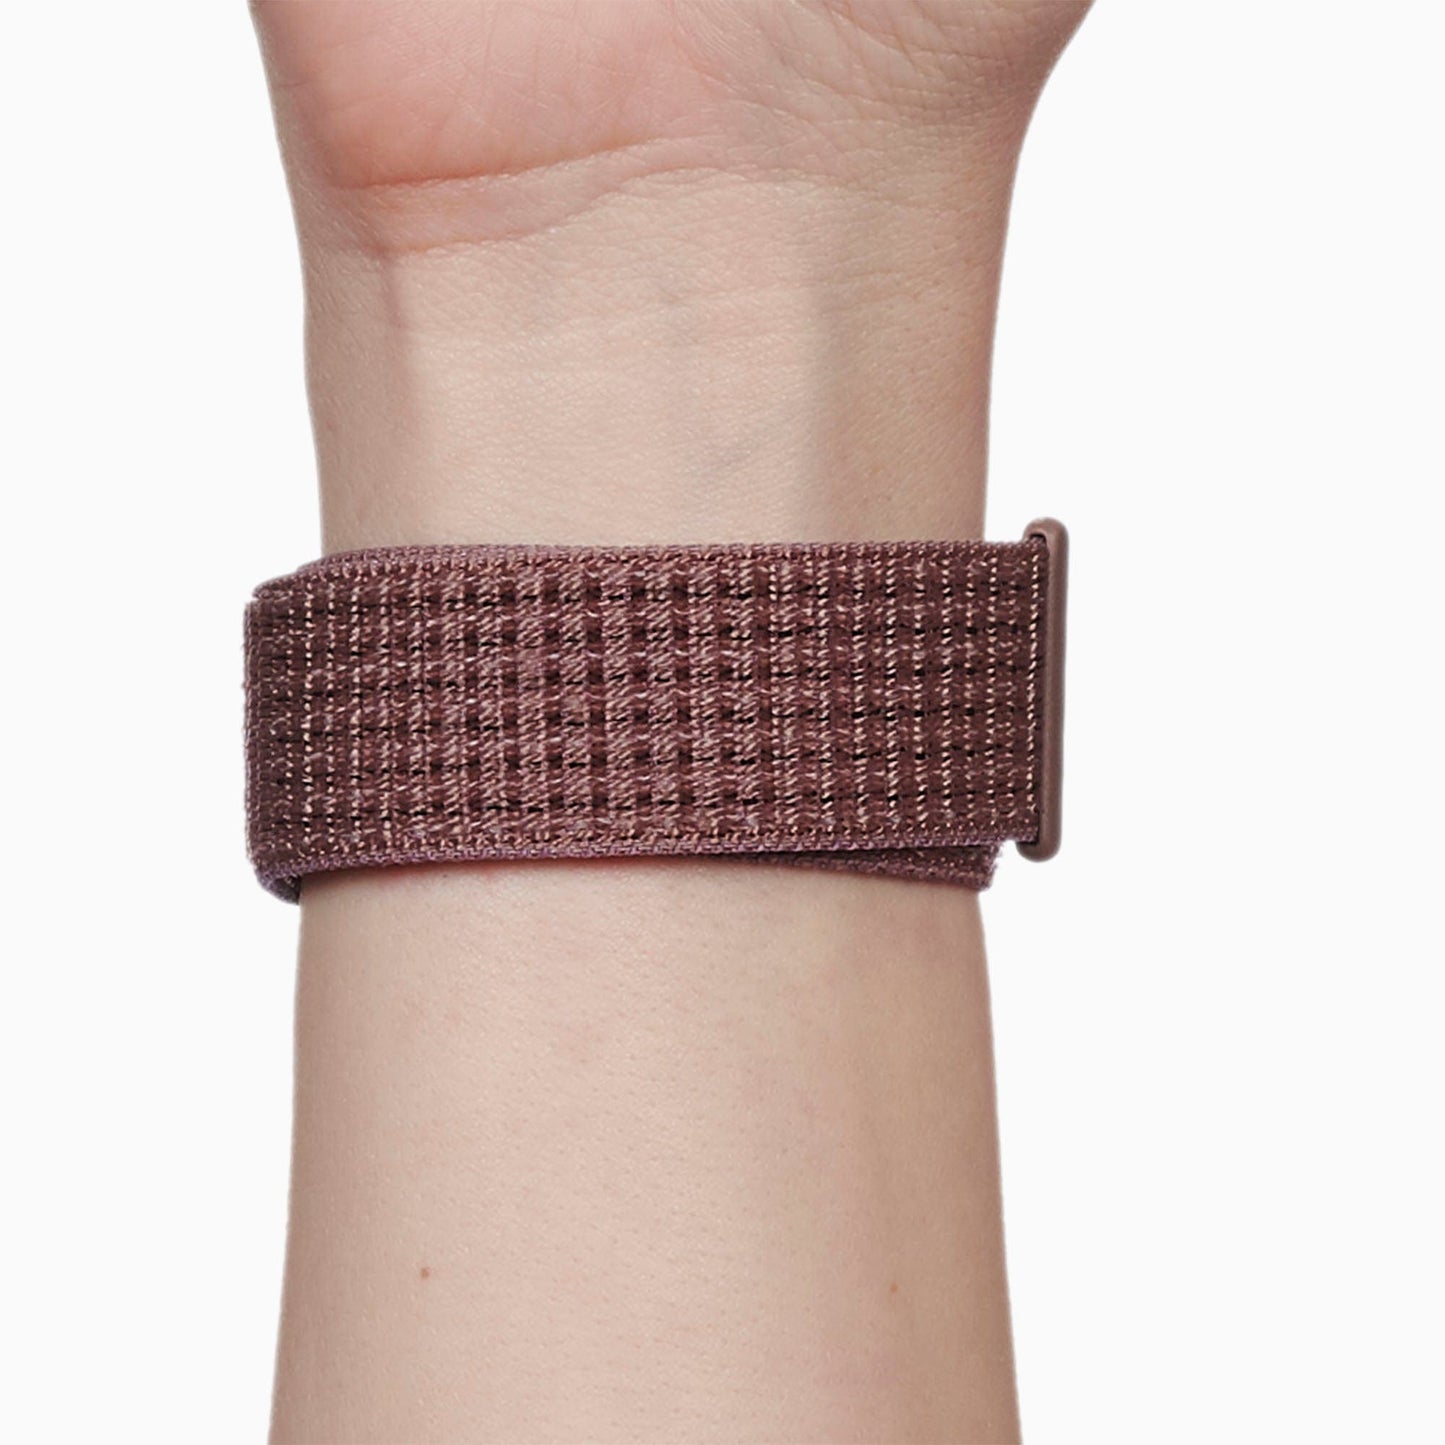 Smokey Mauve Sport Loop Active for Apple Watch